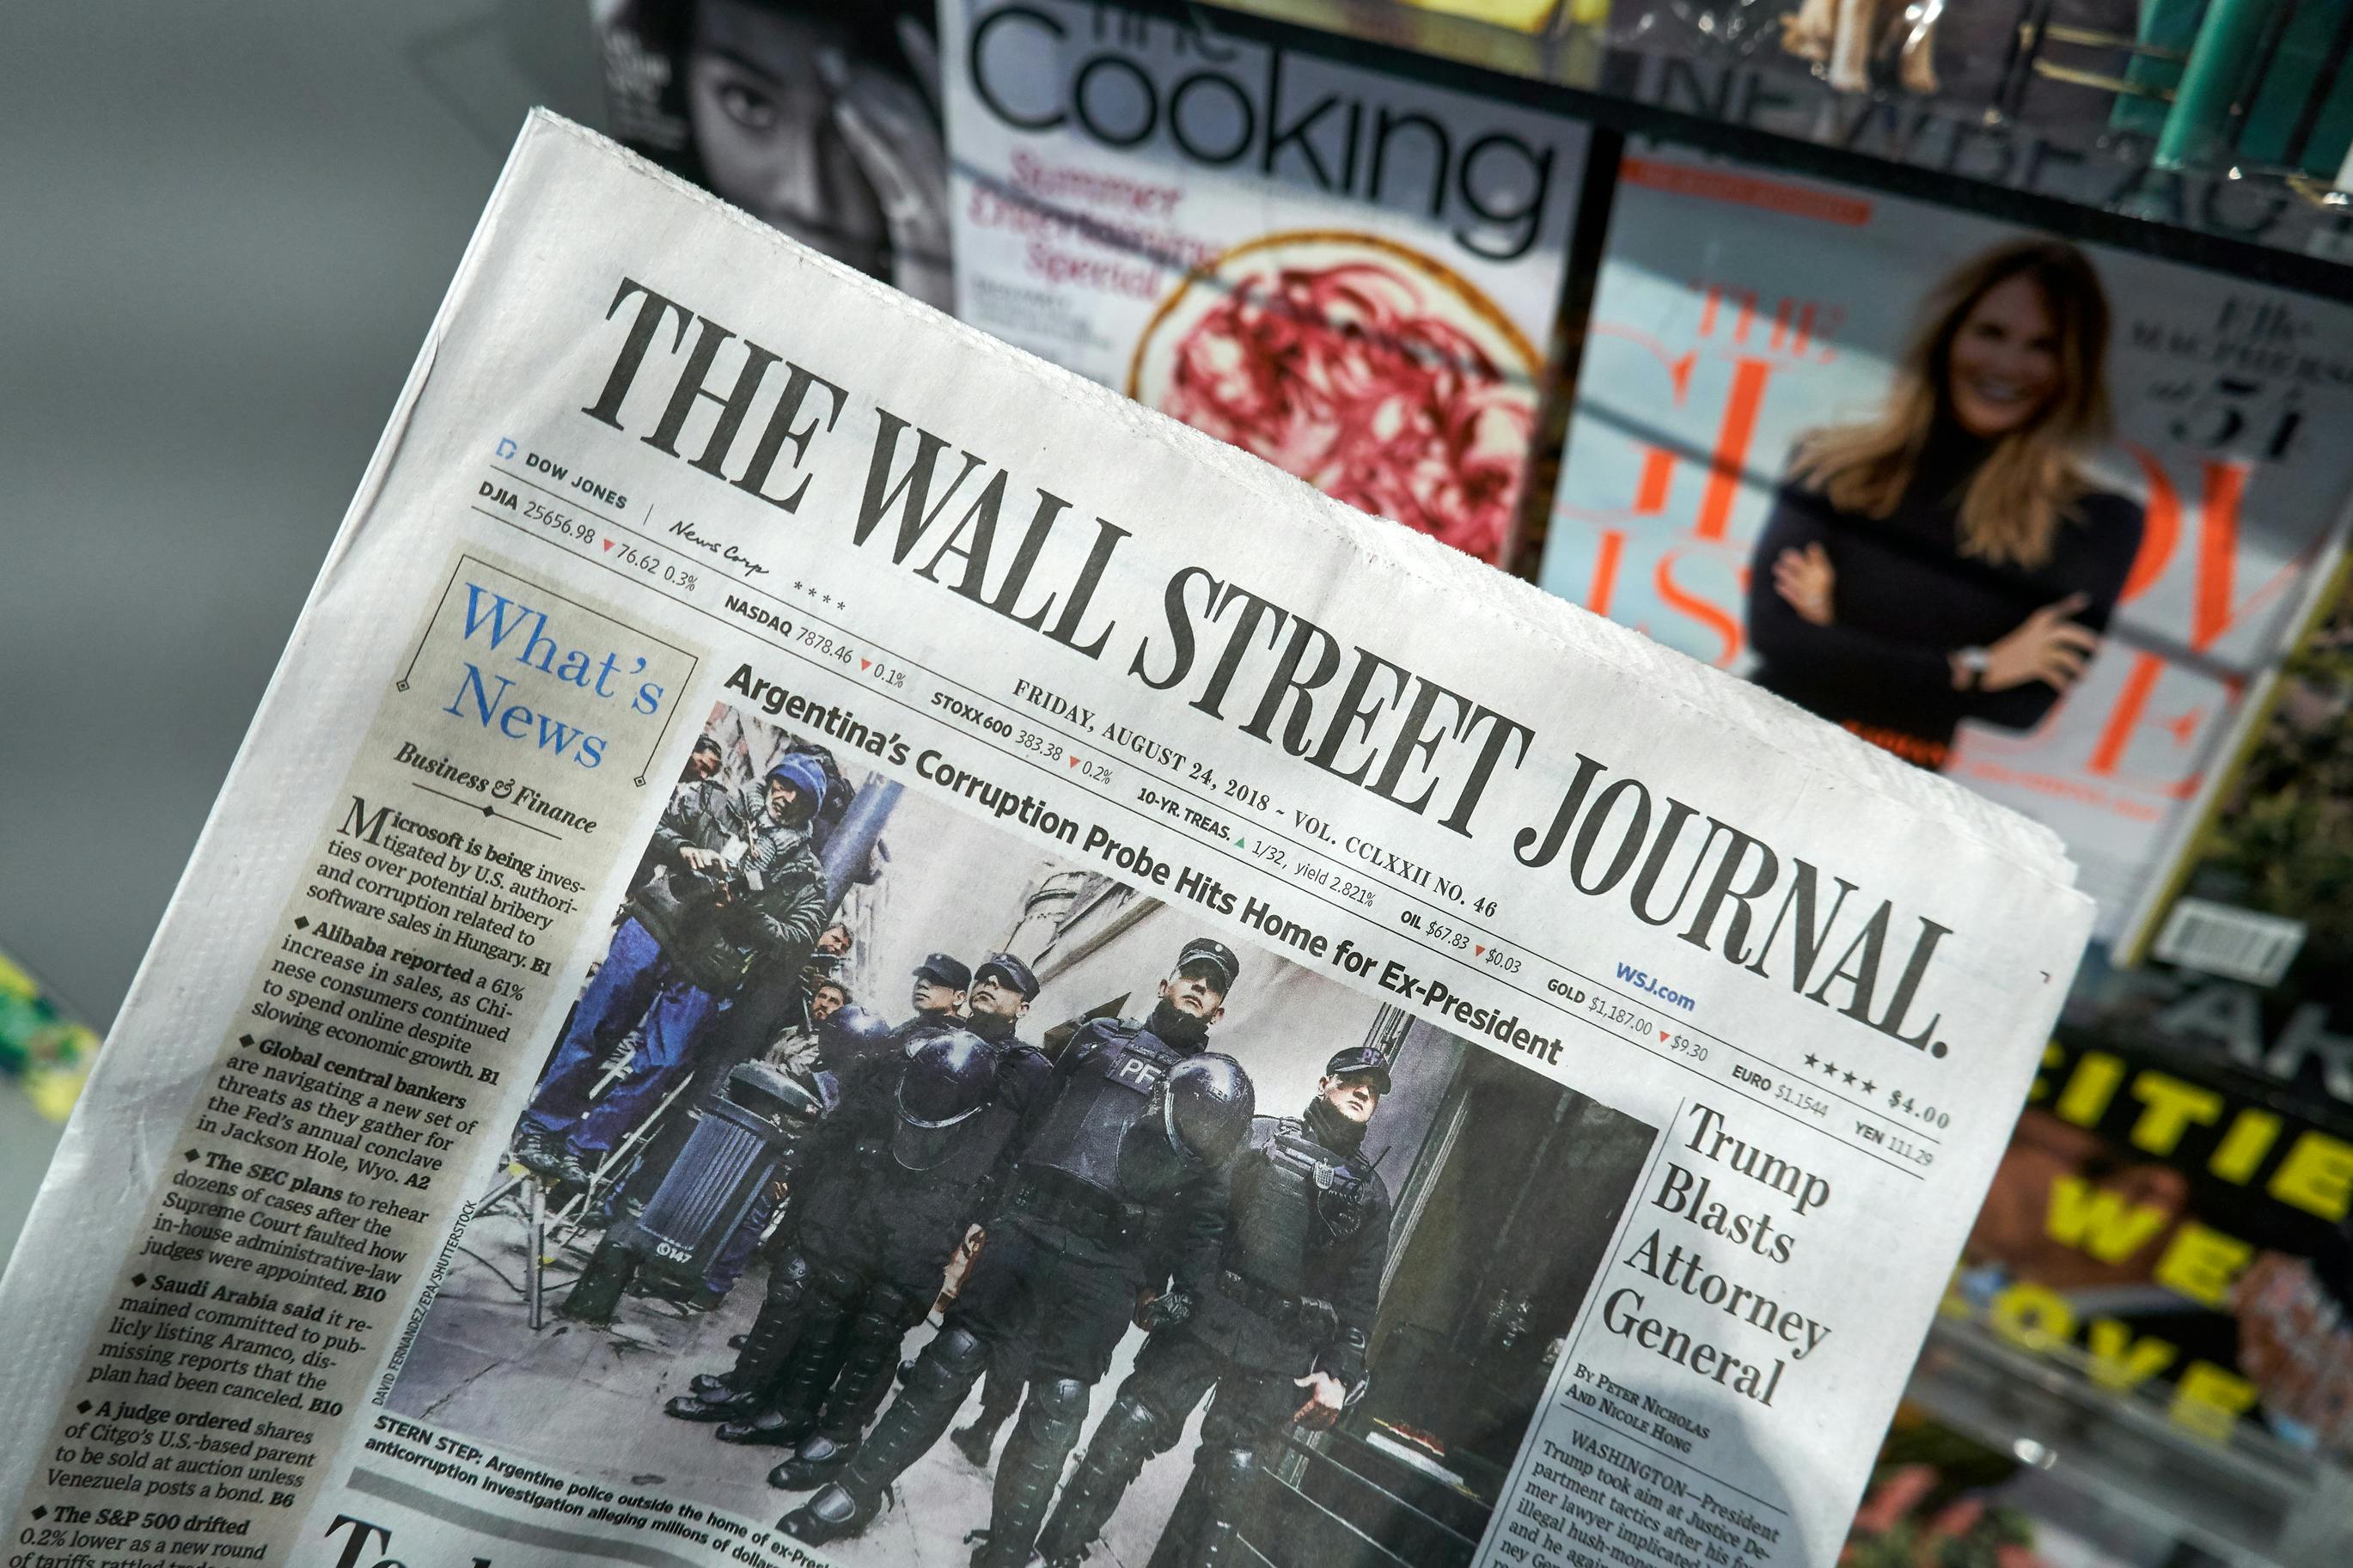 A copy of the Wall Street Journal held up in front of an outdoor newspaper stand.